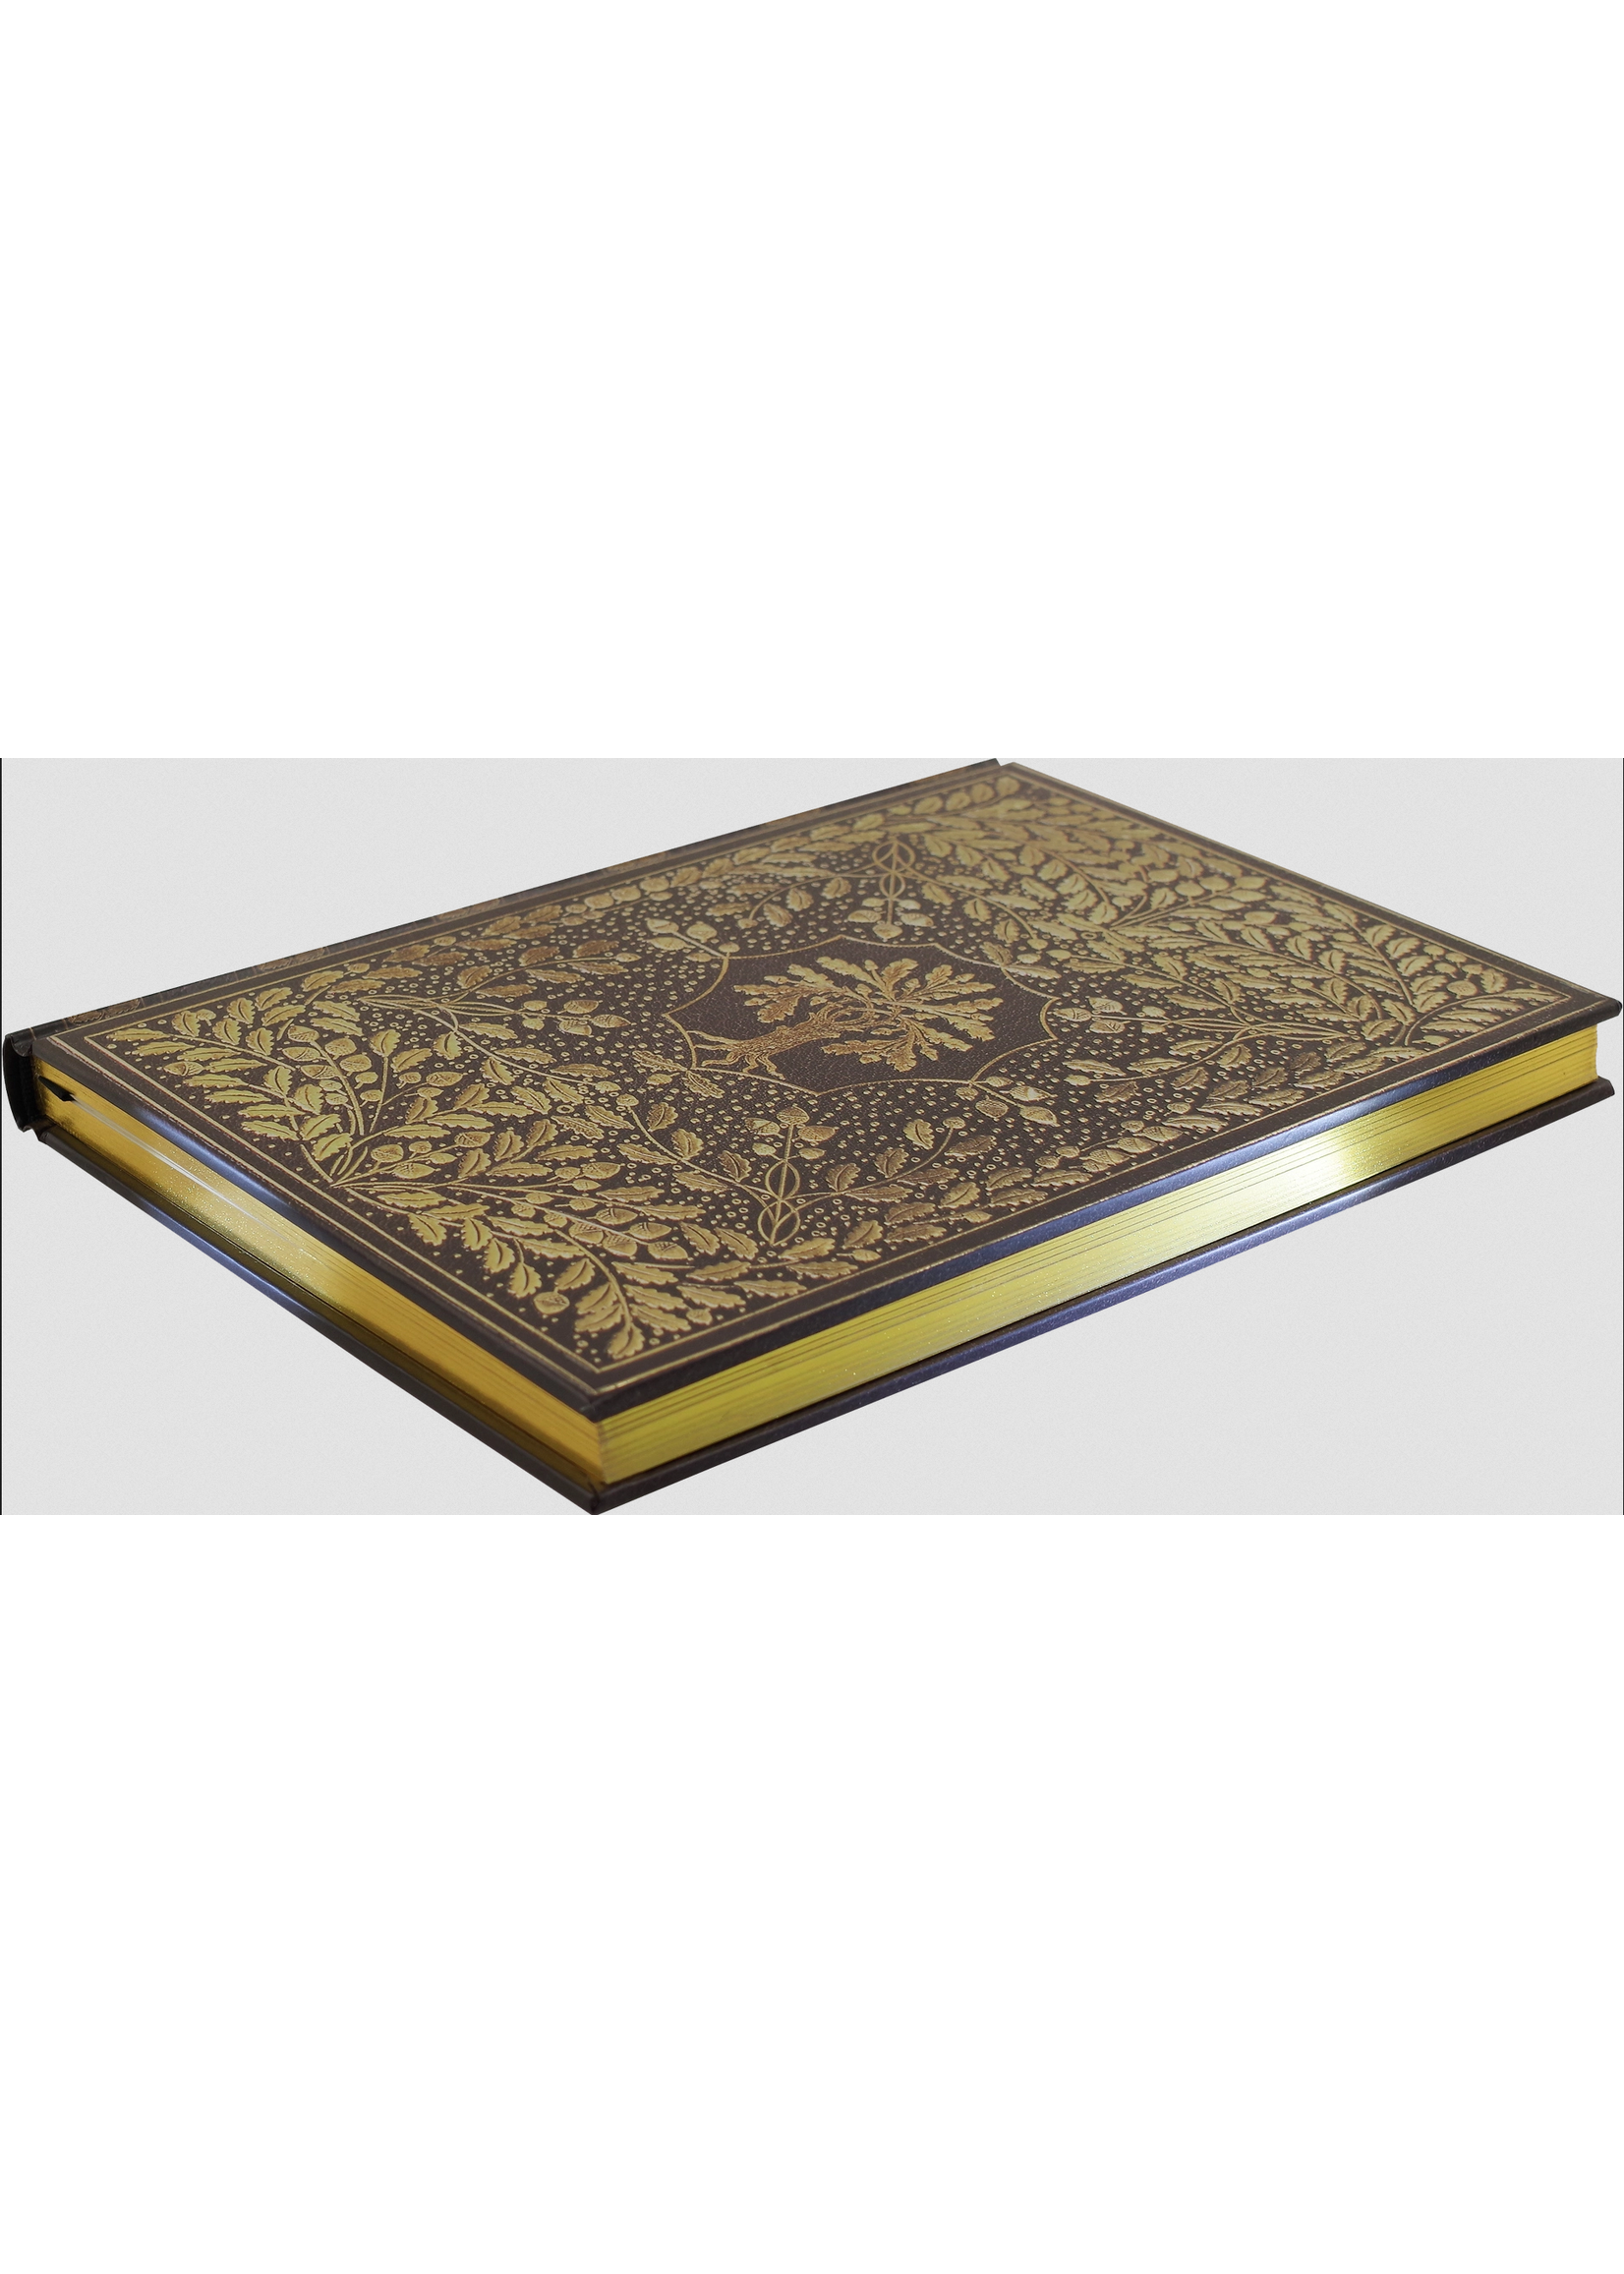 Journal Gilded Tree Of Life